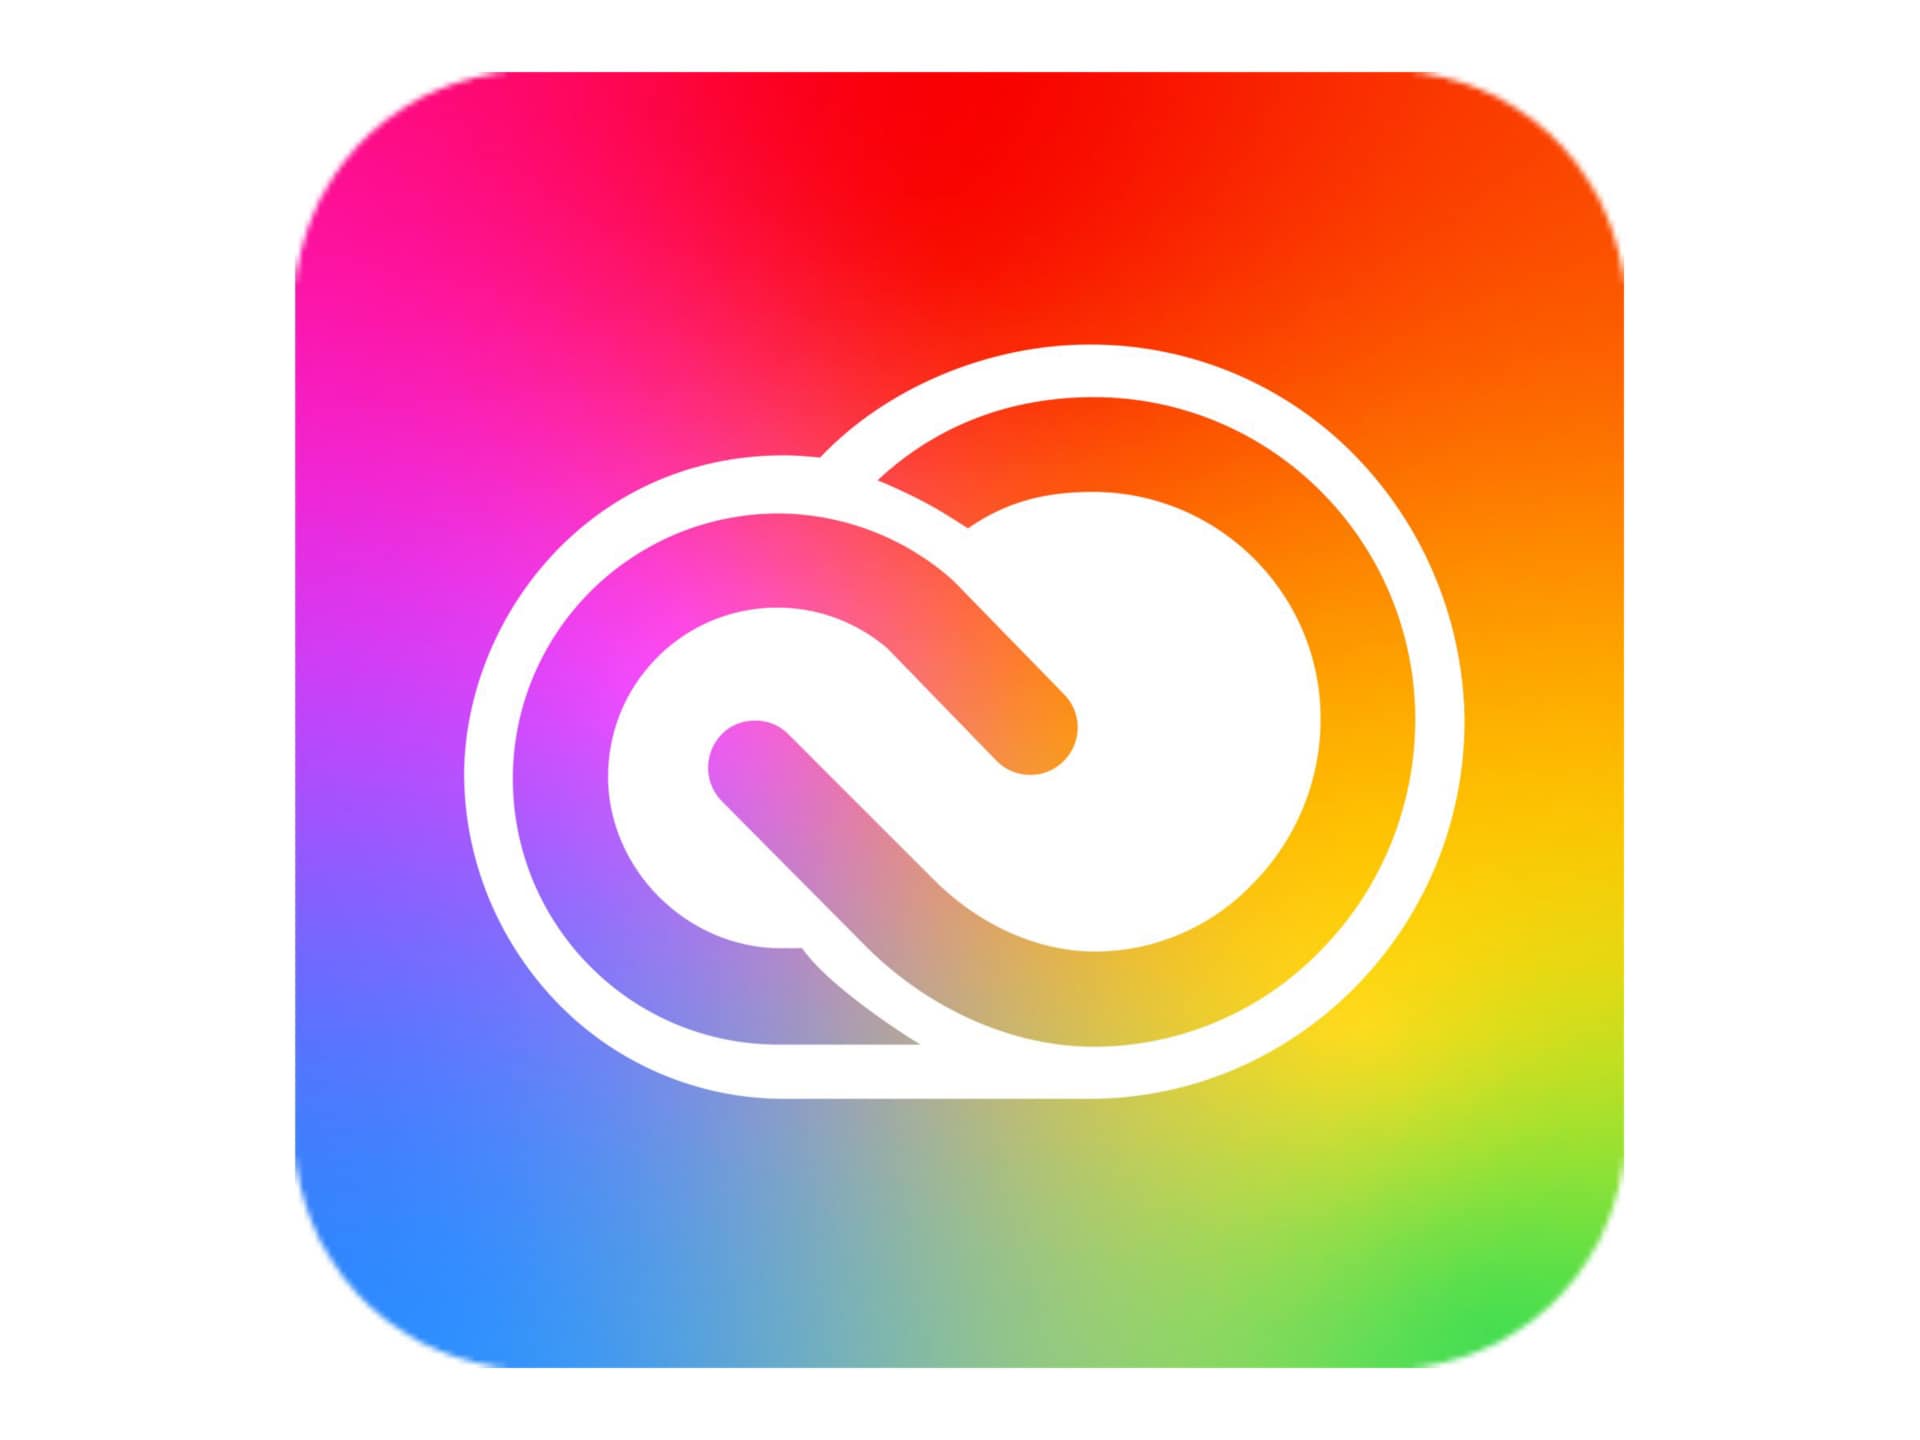 Adobe Creative Cloud All Apps - Pro for enterprise - Subscription New - 1 user